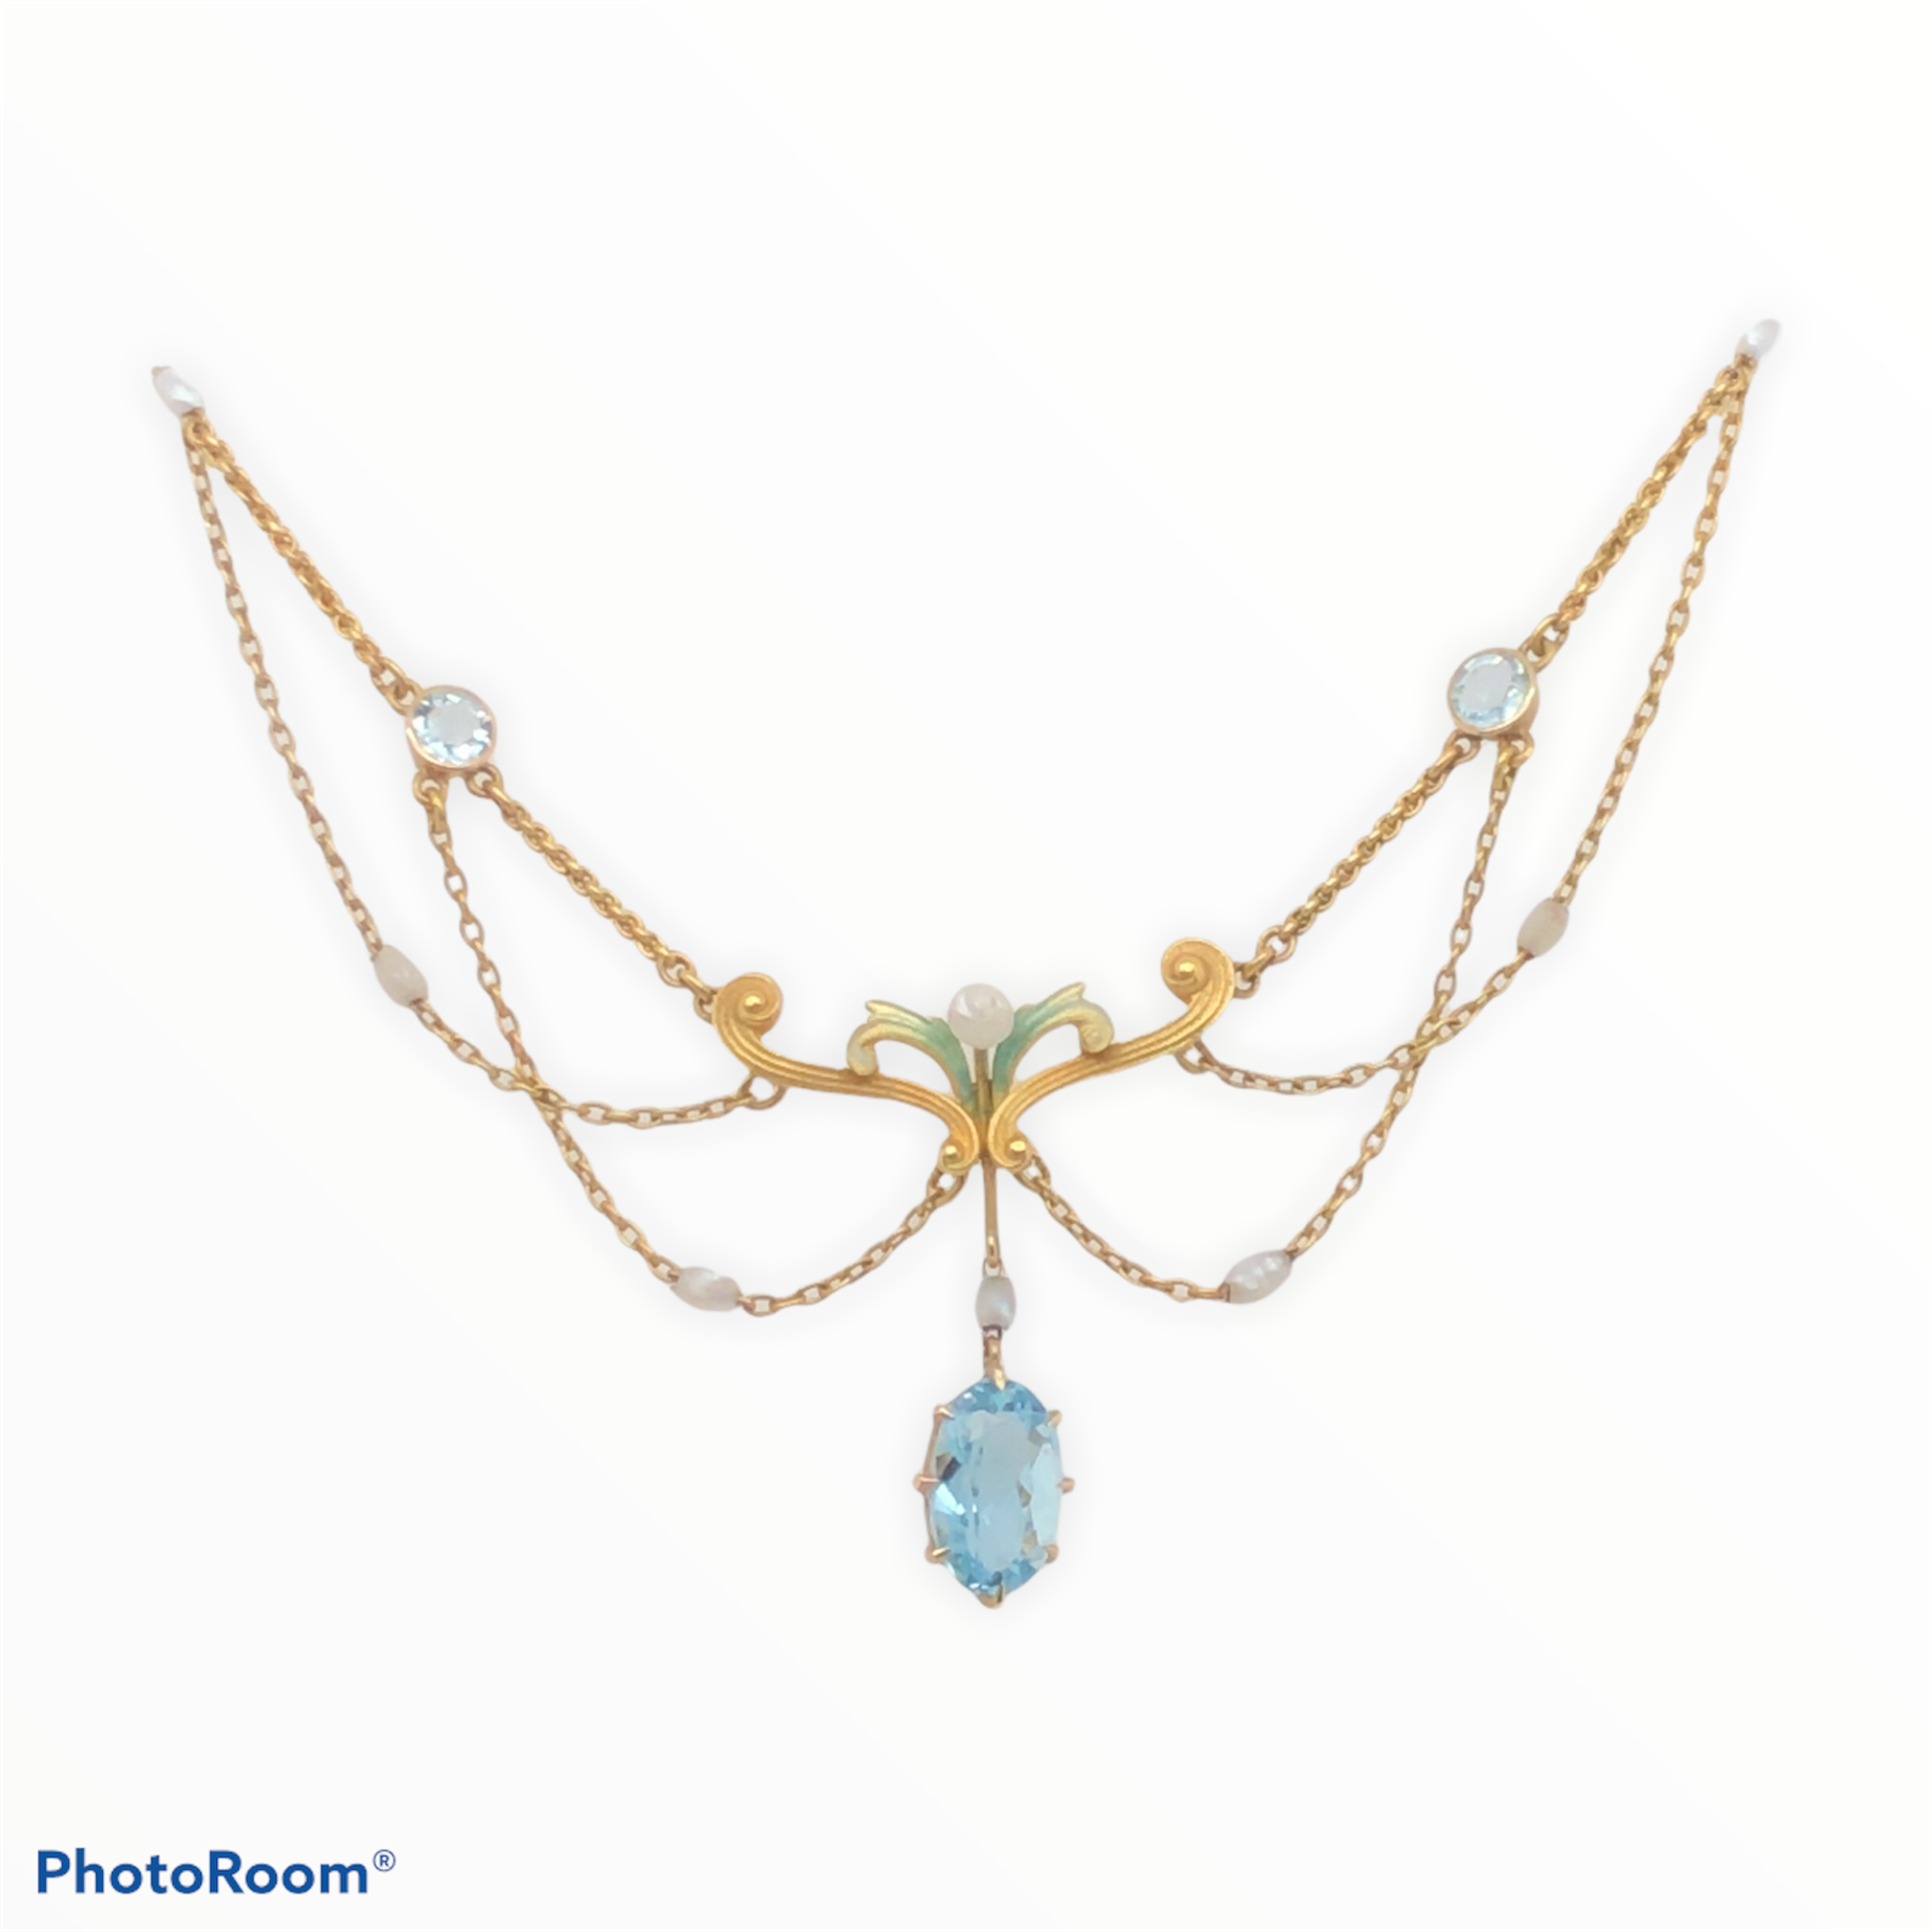 Art Nouveau 14K Yellow Gold Lavalier Necklace, Aquamarine, Pearls, and Enameling  SI0113